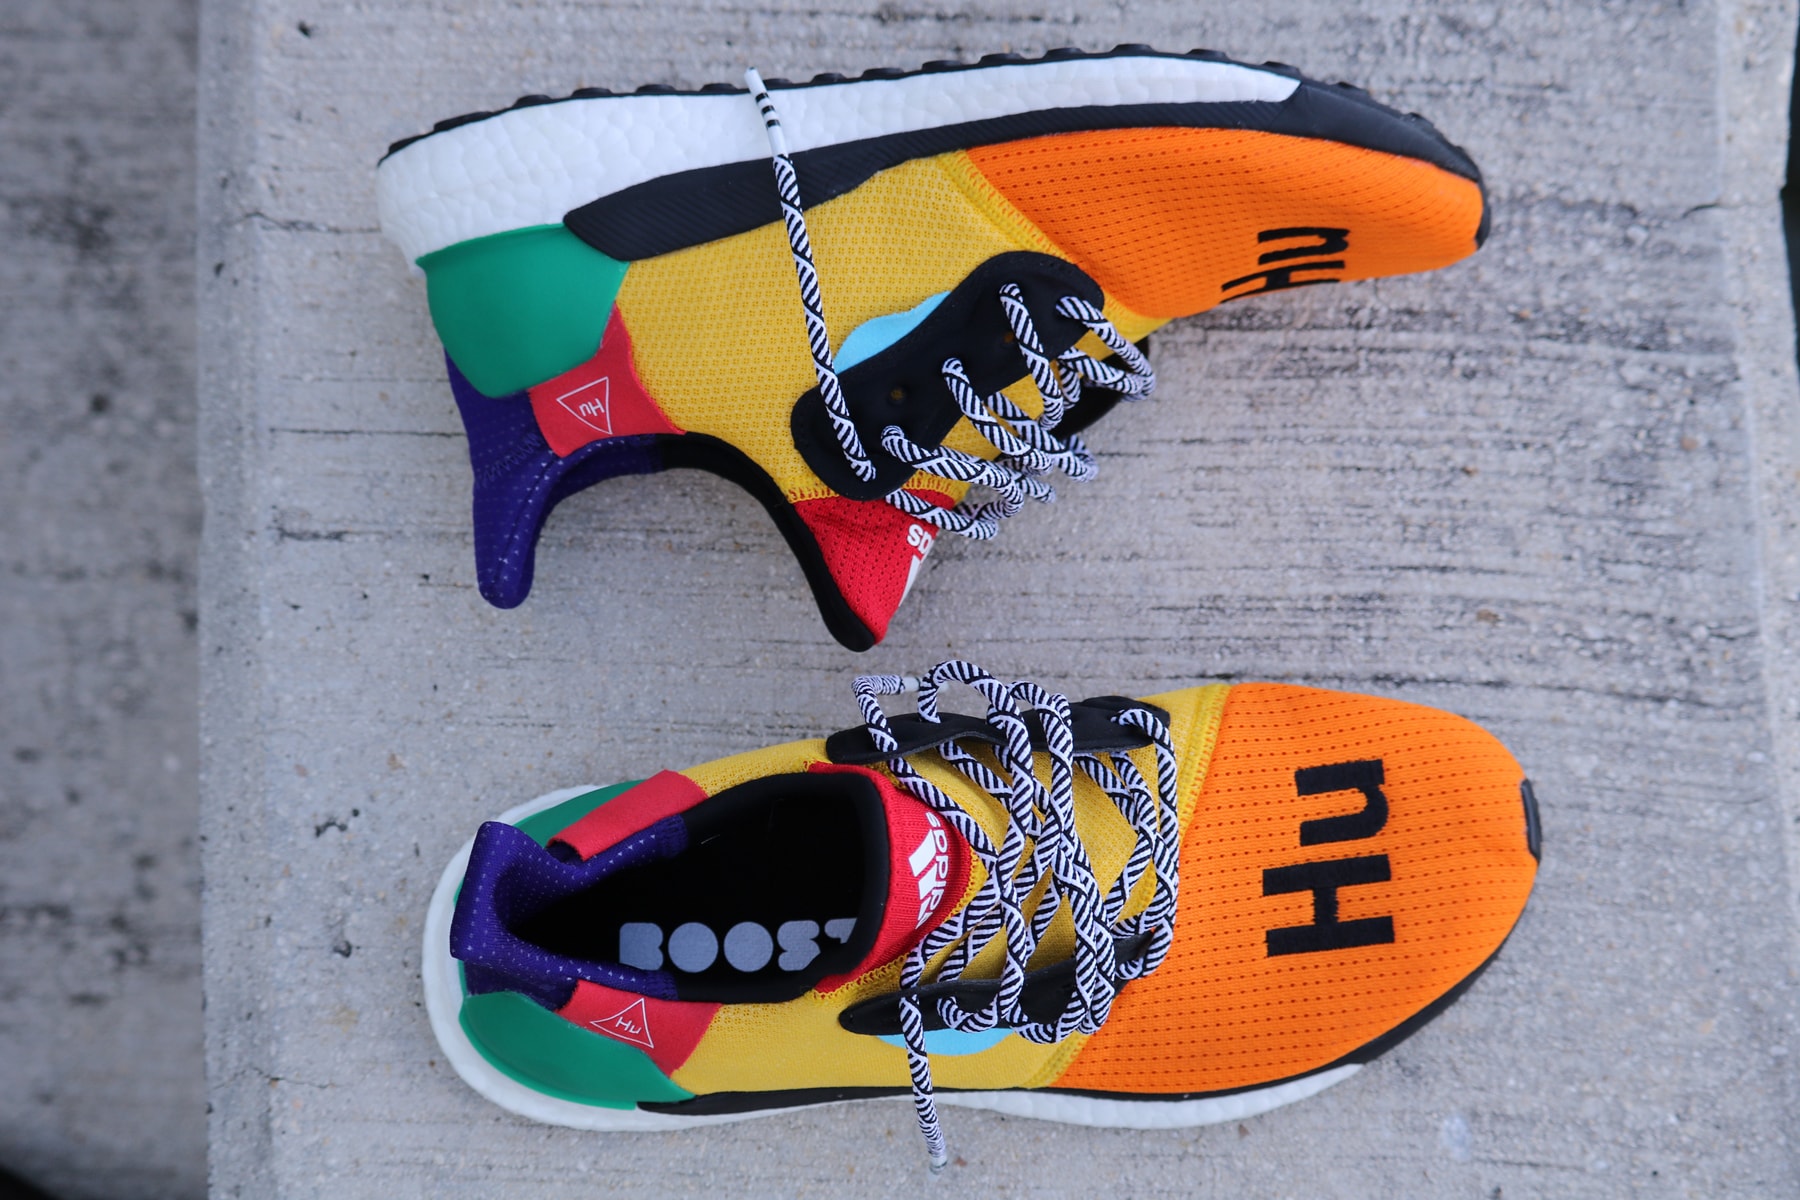 Pharrell adidas Solar Hu Glide ST Early Look rainbow colorway boost midsole yellow orange blue pink black white green pattern laces collaboration drop on foot side black